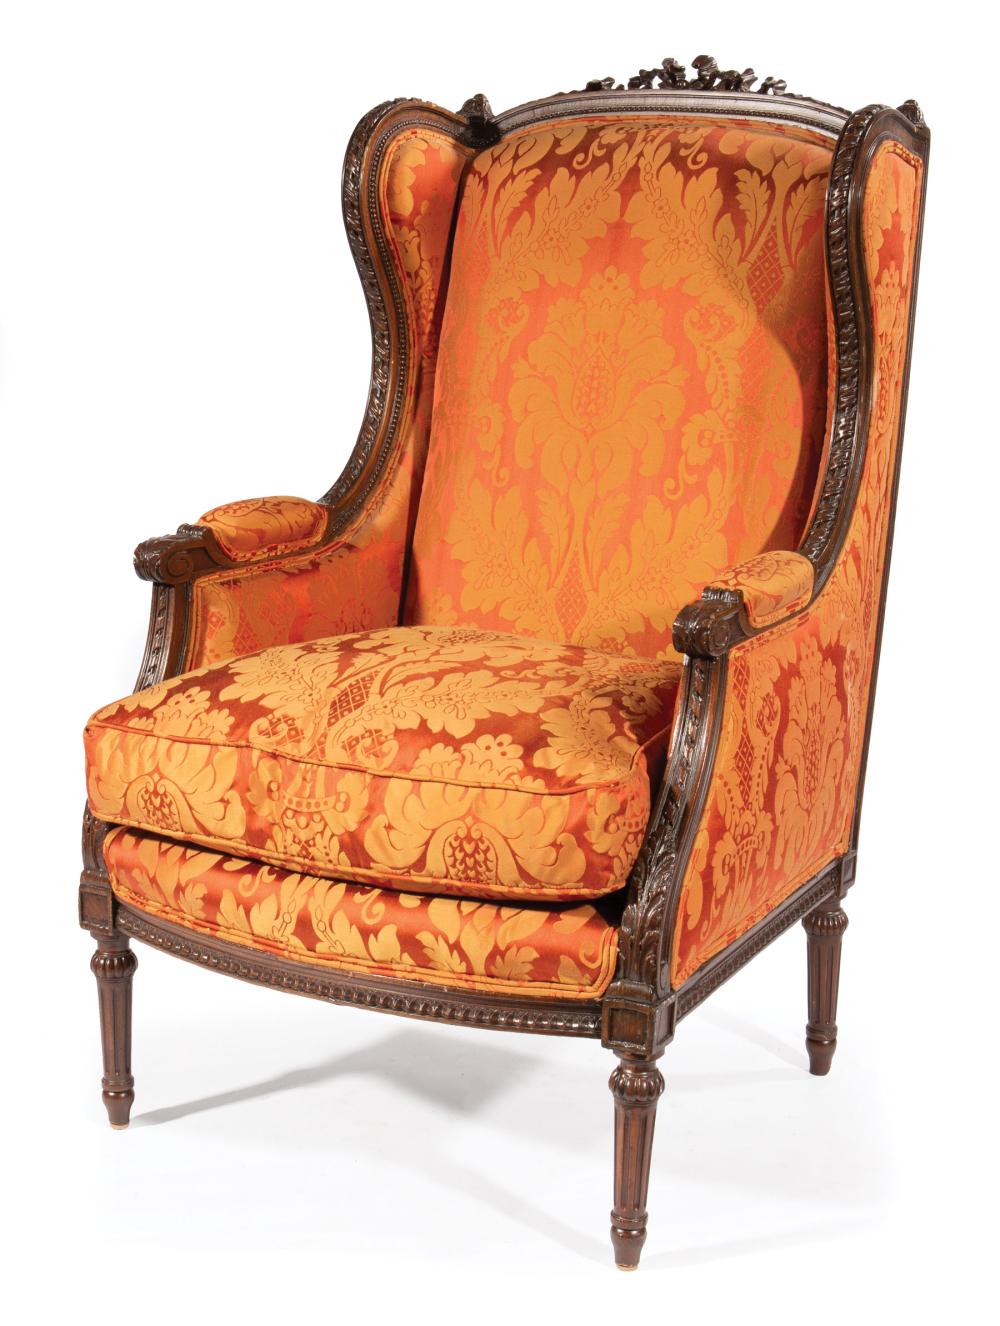 CARVED MAHOGANY BERGERE A OREILLESLouis